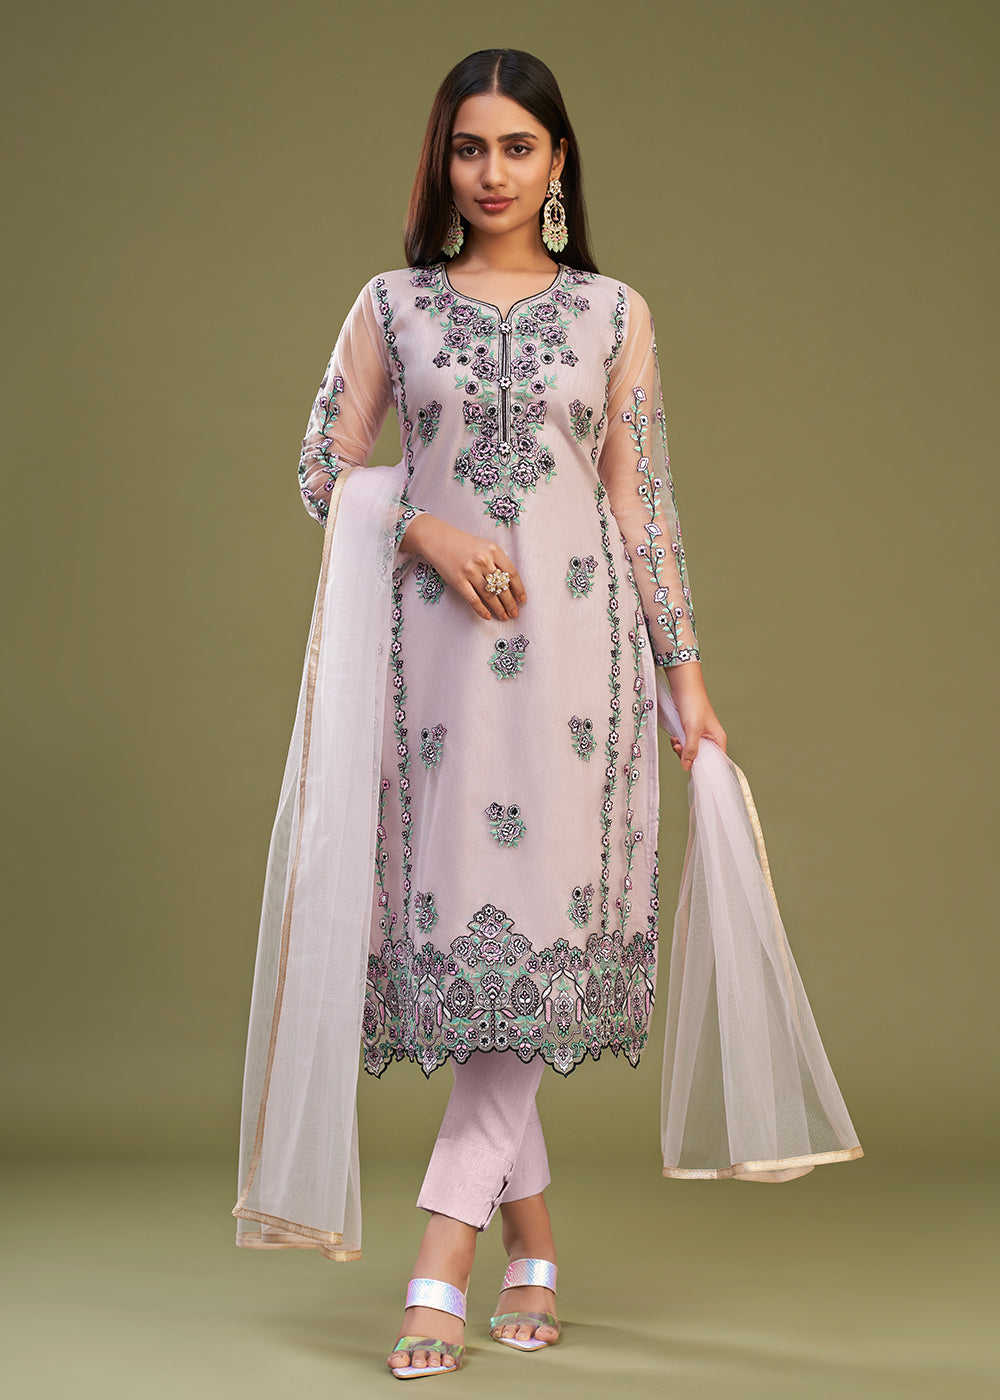 Buy Now Pink Multi Thread Embroidered Net Salwar Suit Online in USA, UK, Canada, Germany, Australia & Worldwide at Empress Clothing. 